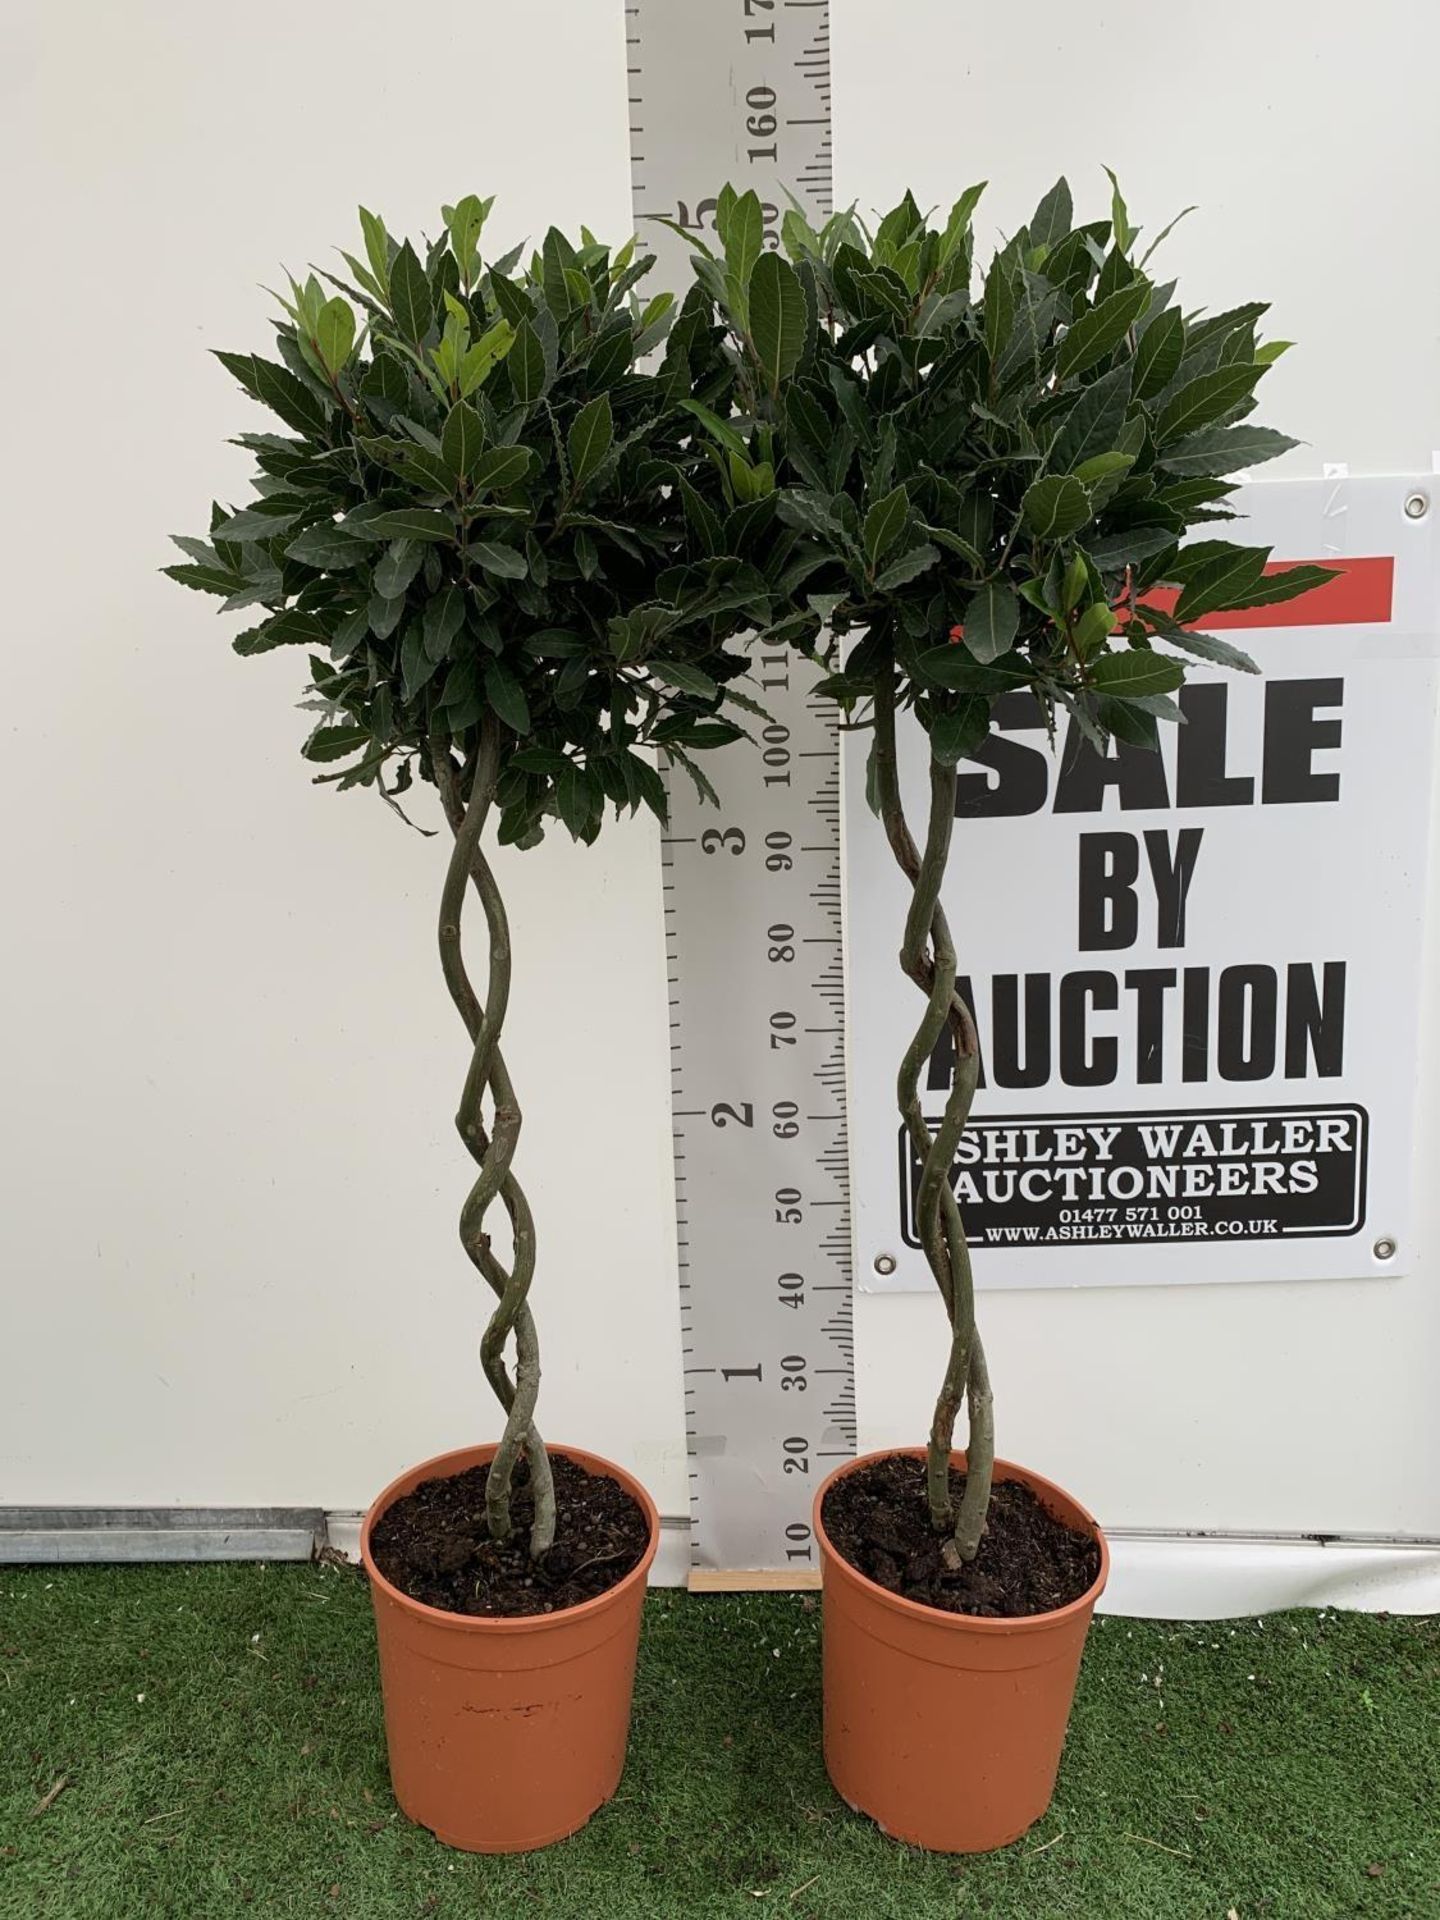 TWO DOUBLE SPIRAL LAURUS BAY TREES APPROX 150CM IN HEIGHT IN 7.5 LTR POTS PLUS VAT TO BE SOLD FOR - Image 3 of 8